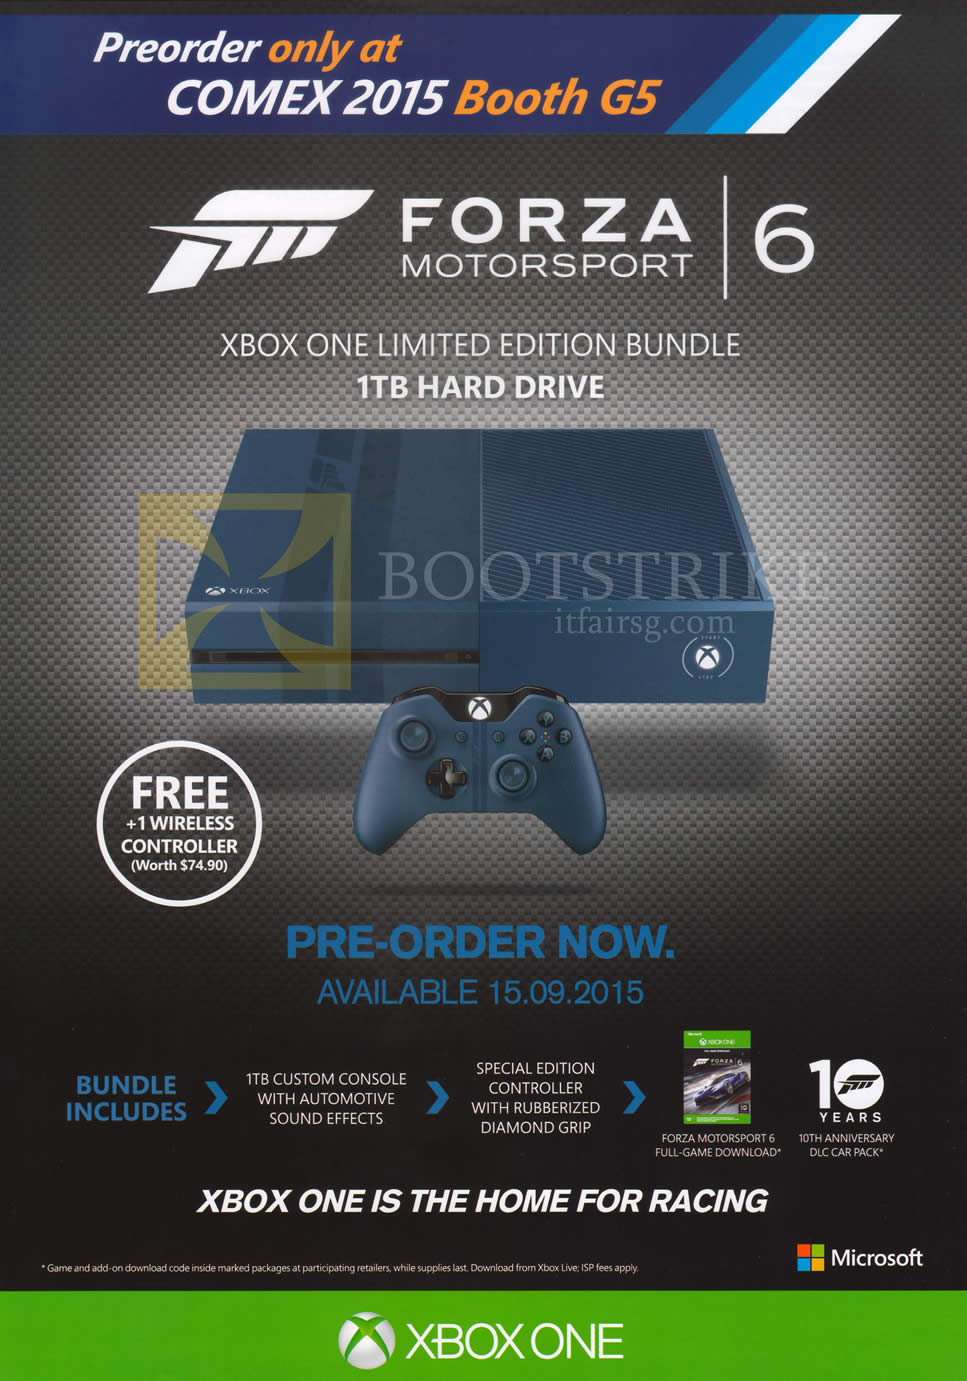 COMEX 2015 price list image brochure of Microsoft Xbox One, Forza Motorsport 6, Xbox One Limited Edition Bundle